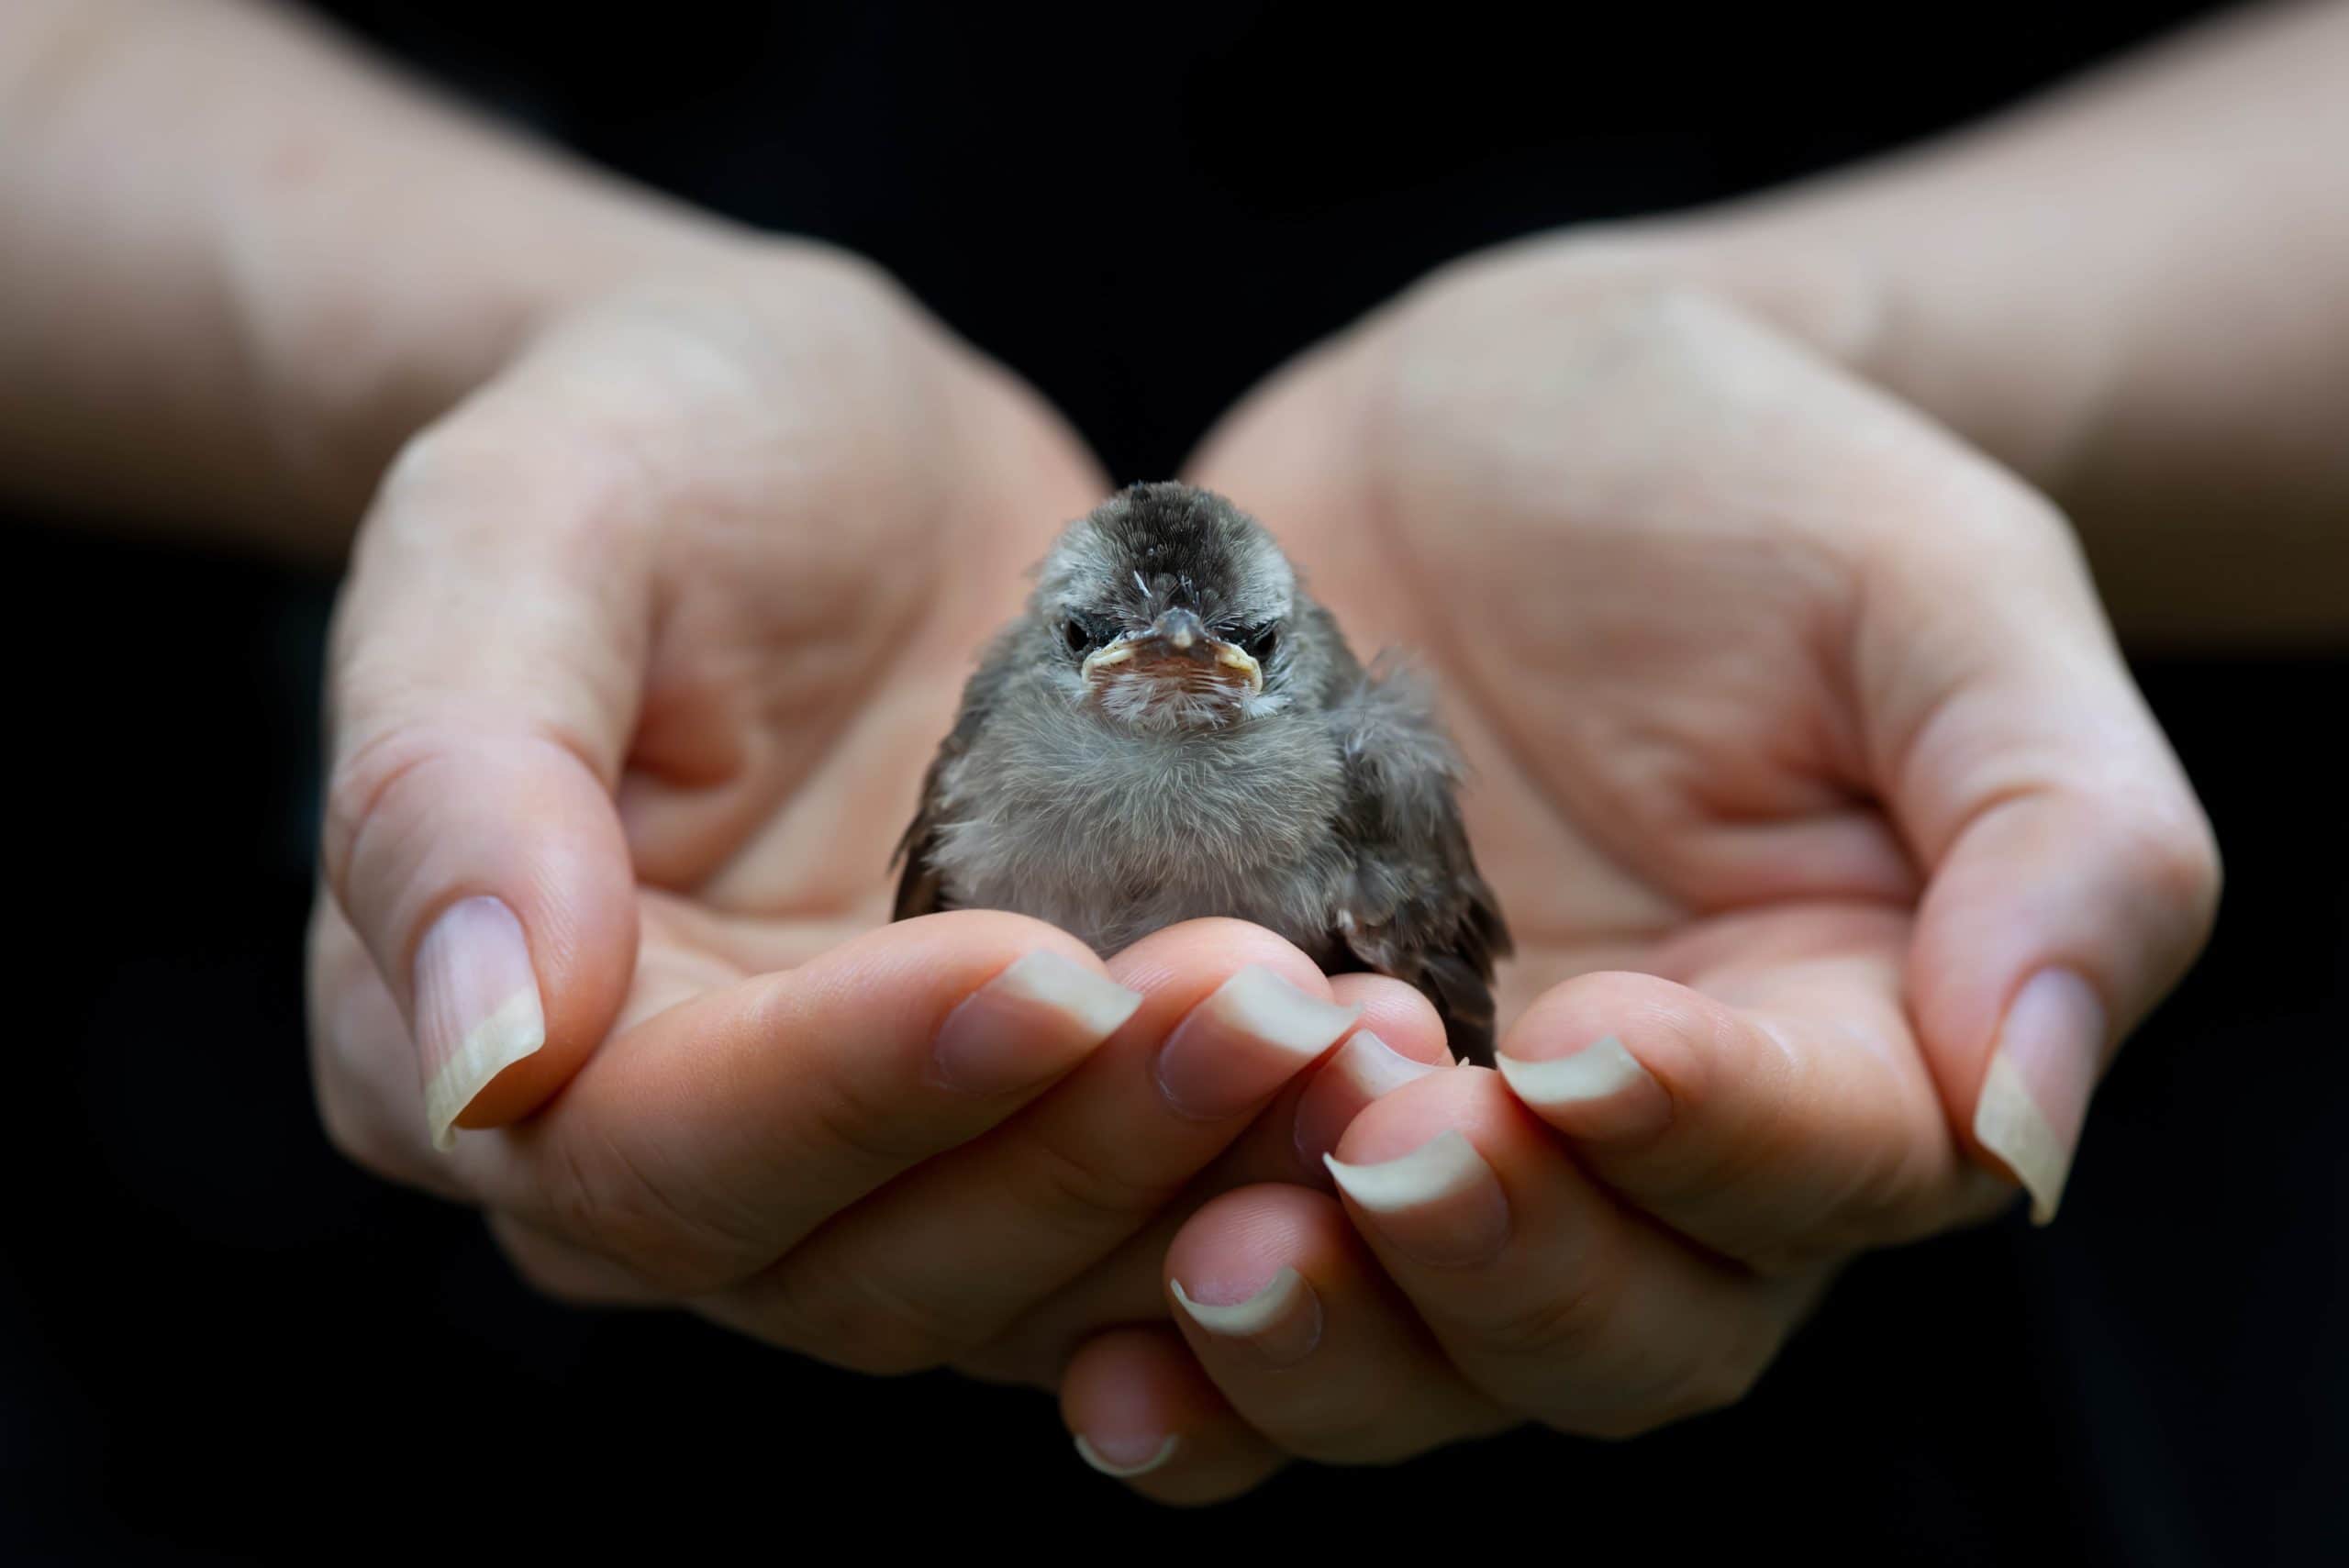 Hands holding small bird for compassion and donation to Mercy Animal Hospital.